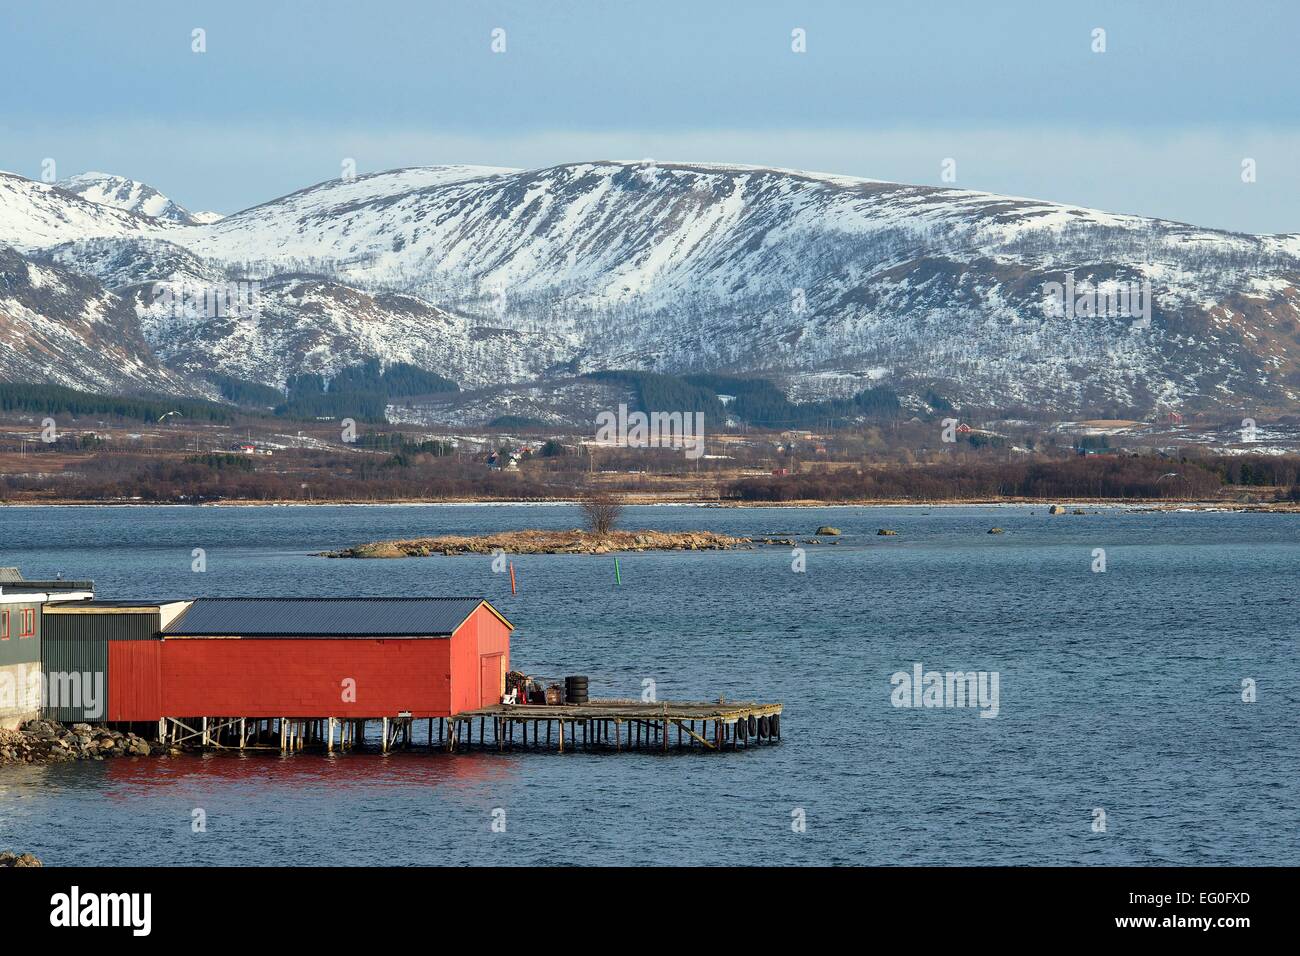 Mountainous snow covered island landscape with big red fisherman's cottage on the water, 26 February 2014 Stock Photo